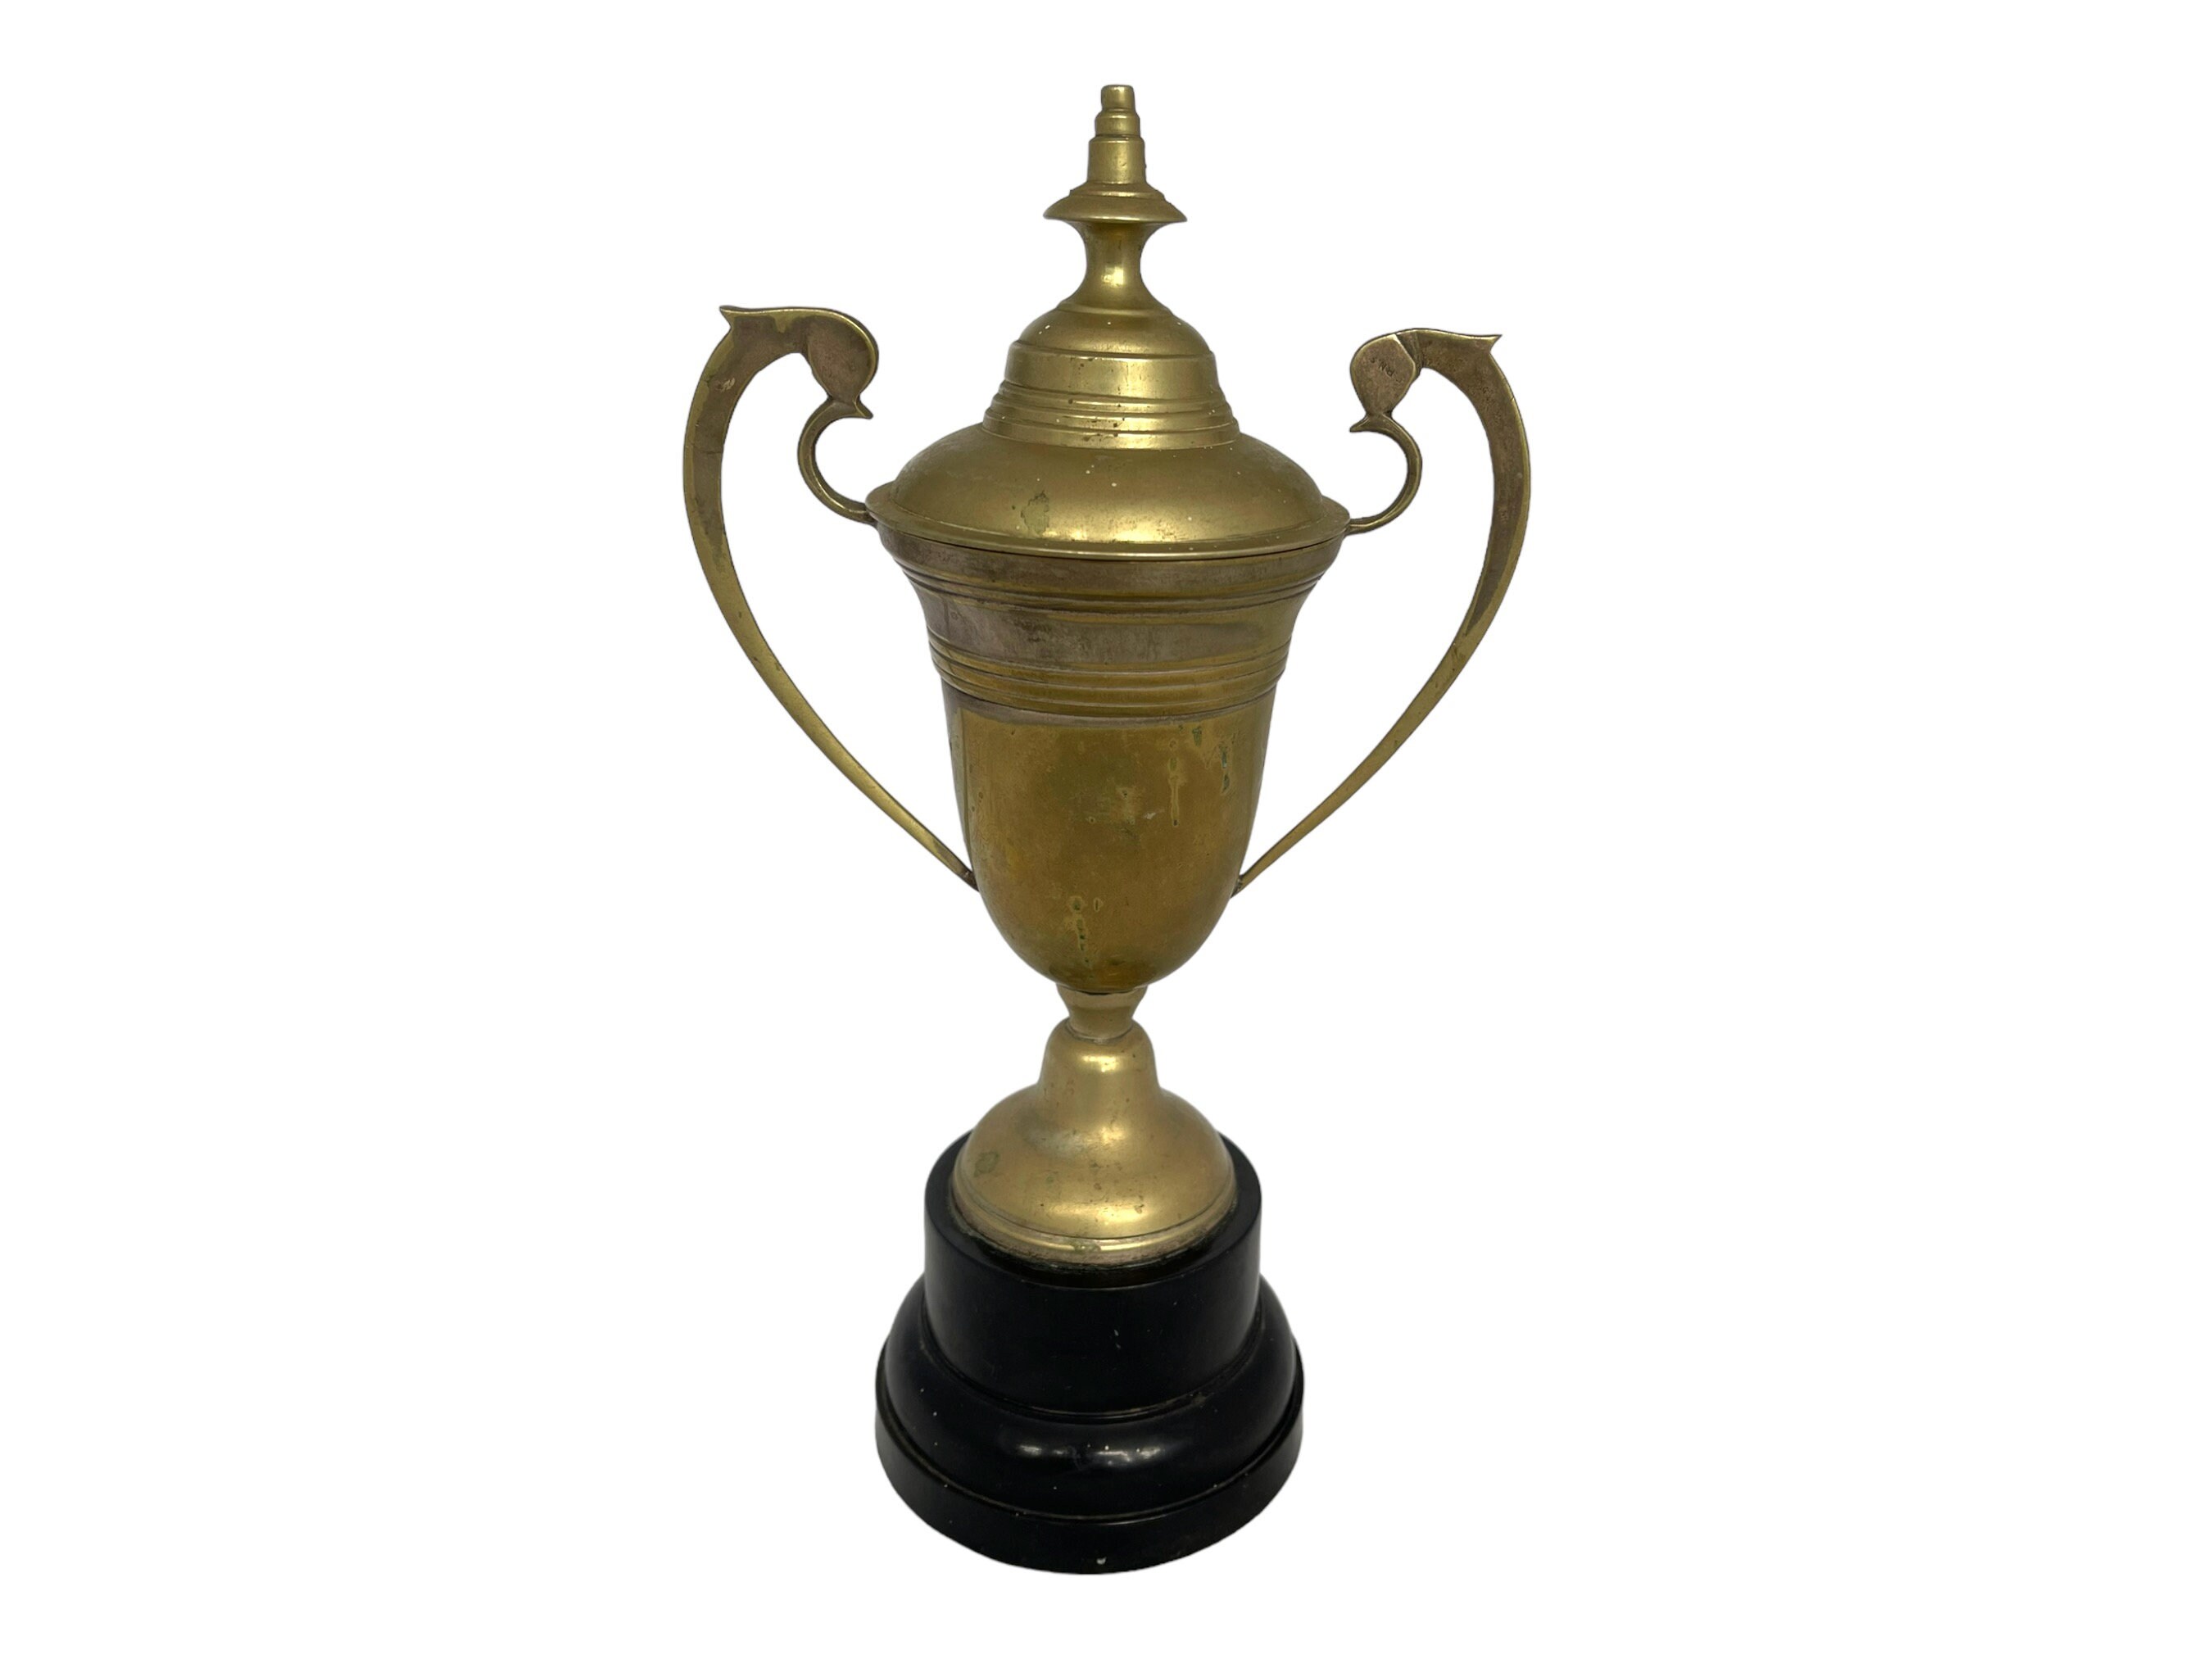 20 Perpetual King's Cup Trophy - Gold - TrophySmack